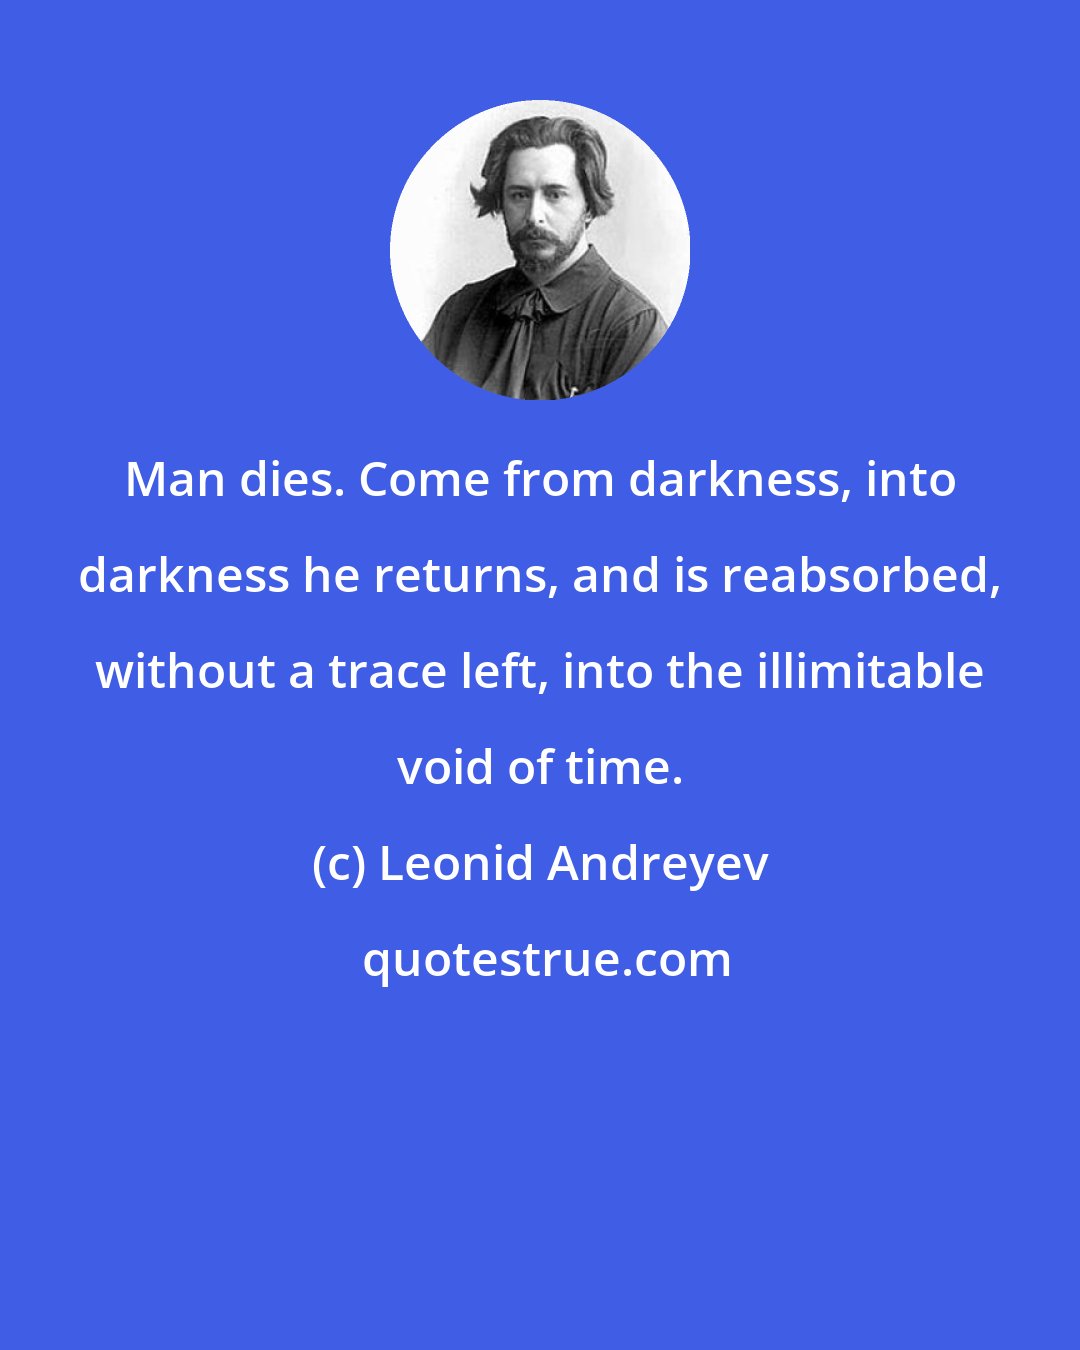 Leonid Andreyev: Man dies. Come from darkness, into darkness he returns, and is reabsorbed, without a trace left, into the illimitable void of time.